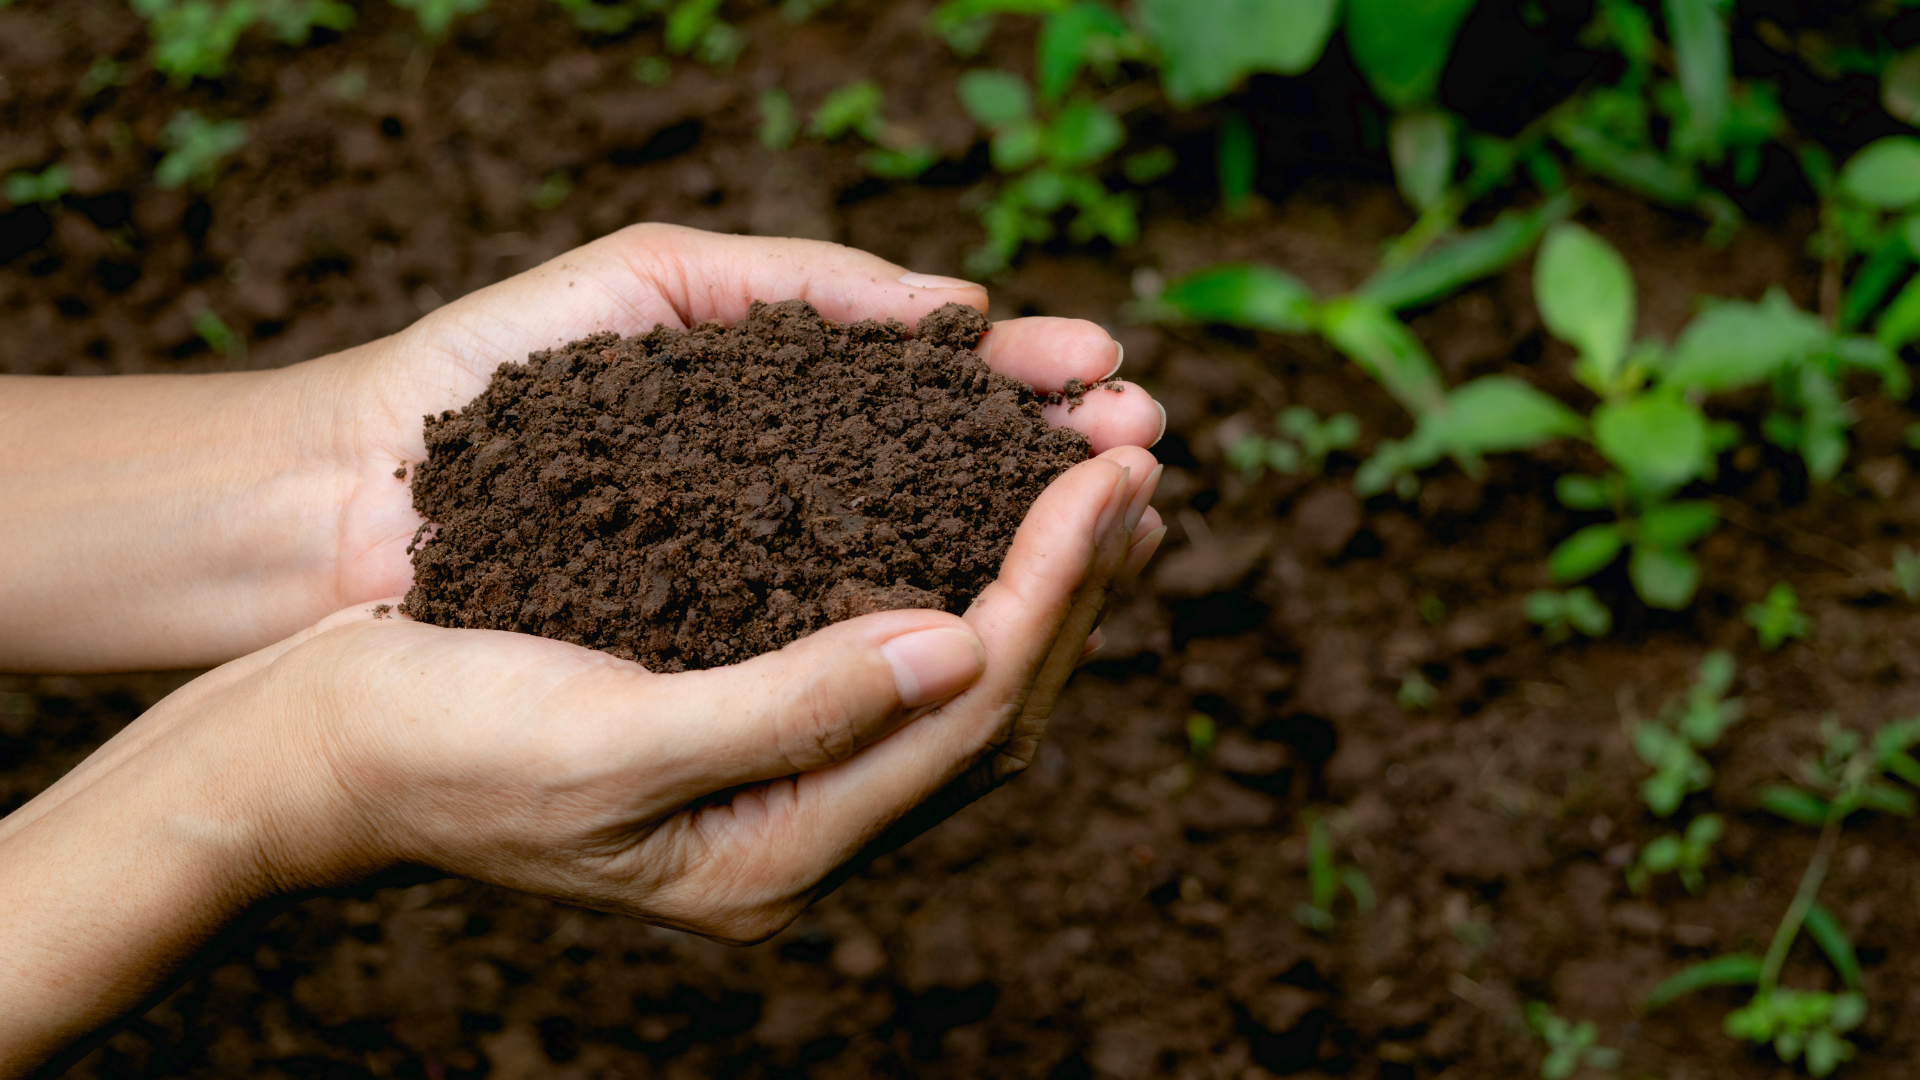 hands holding brown soil with plants/grass in background